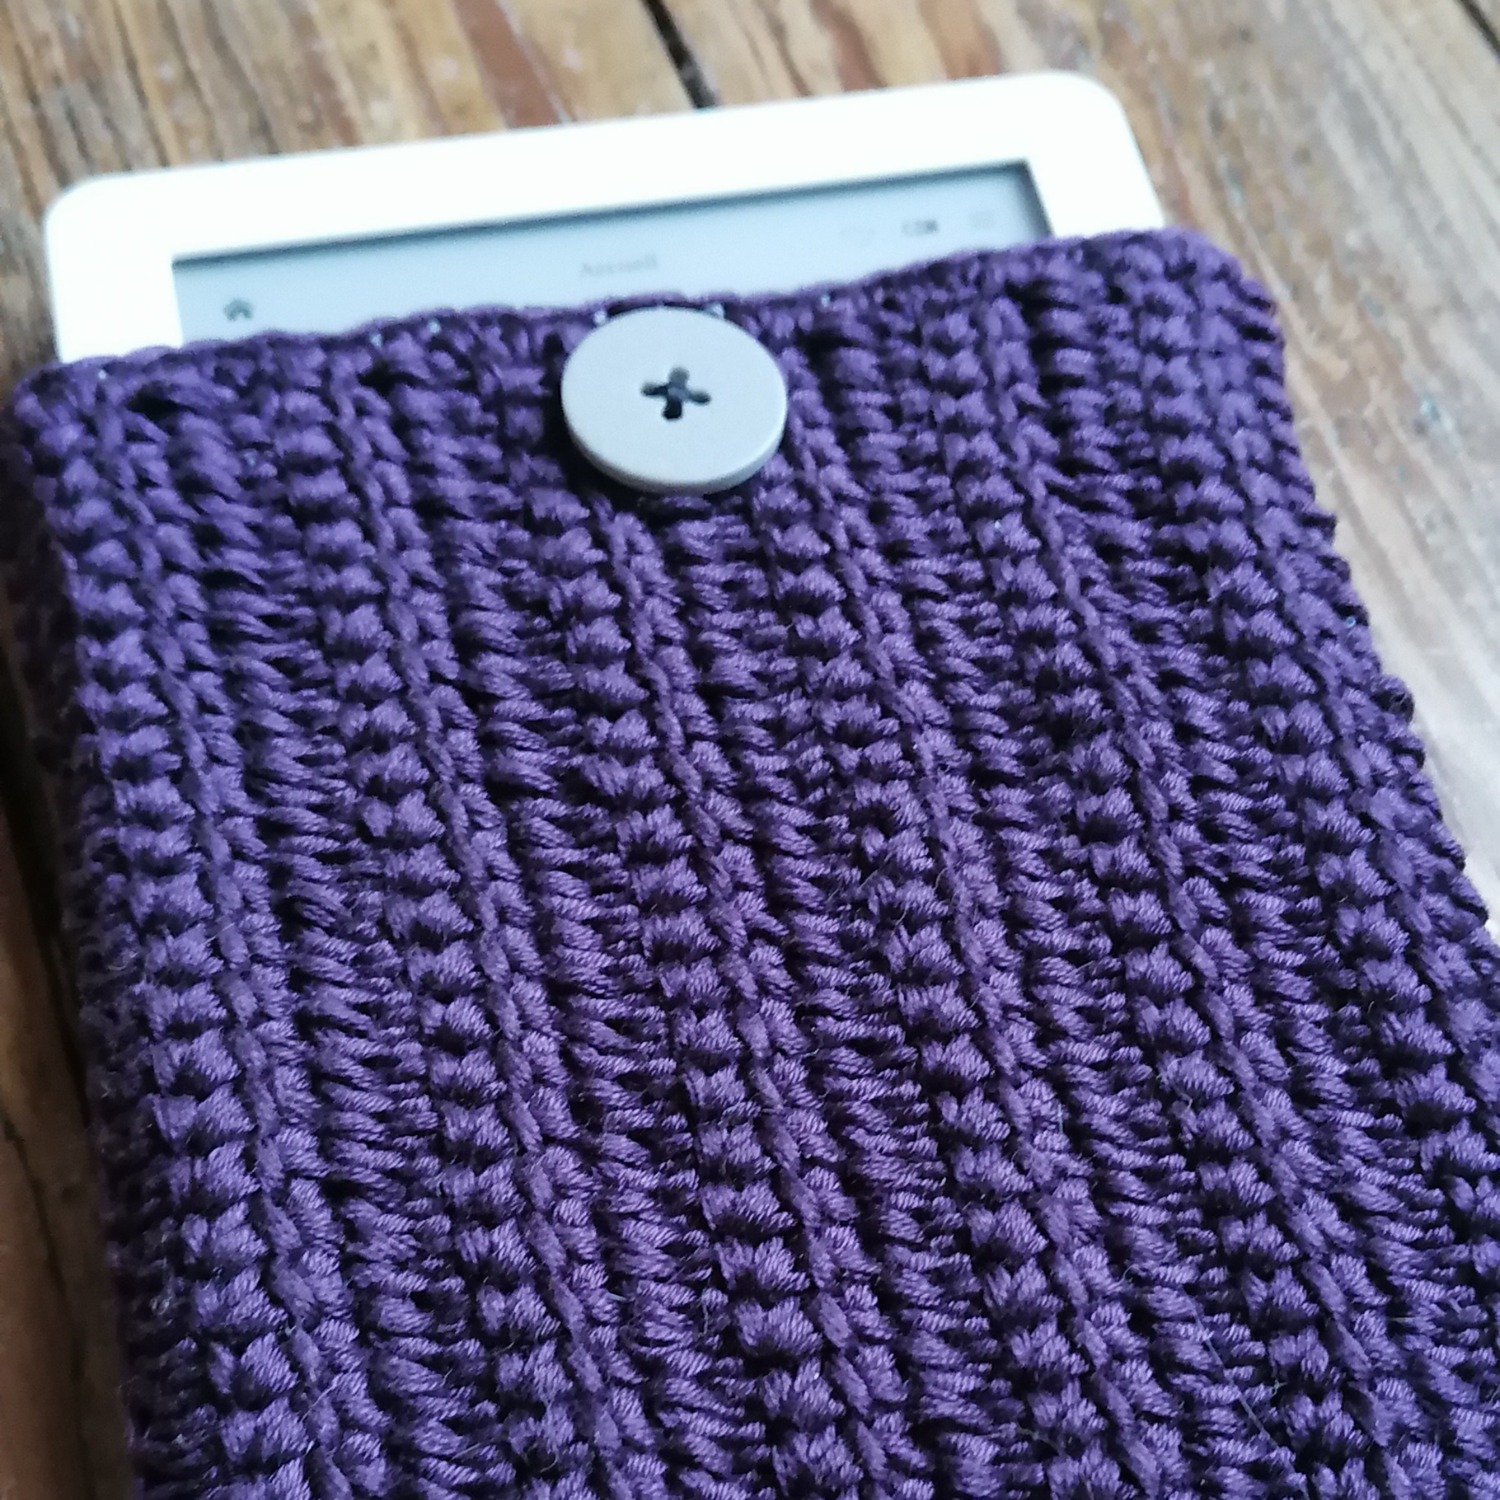 Crochet Kindle Cover Free Pattern